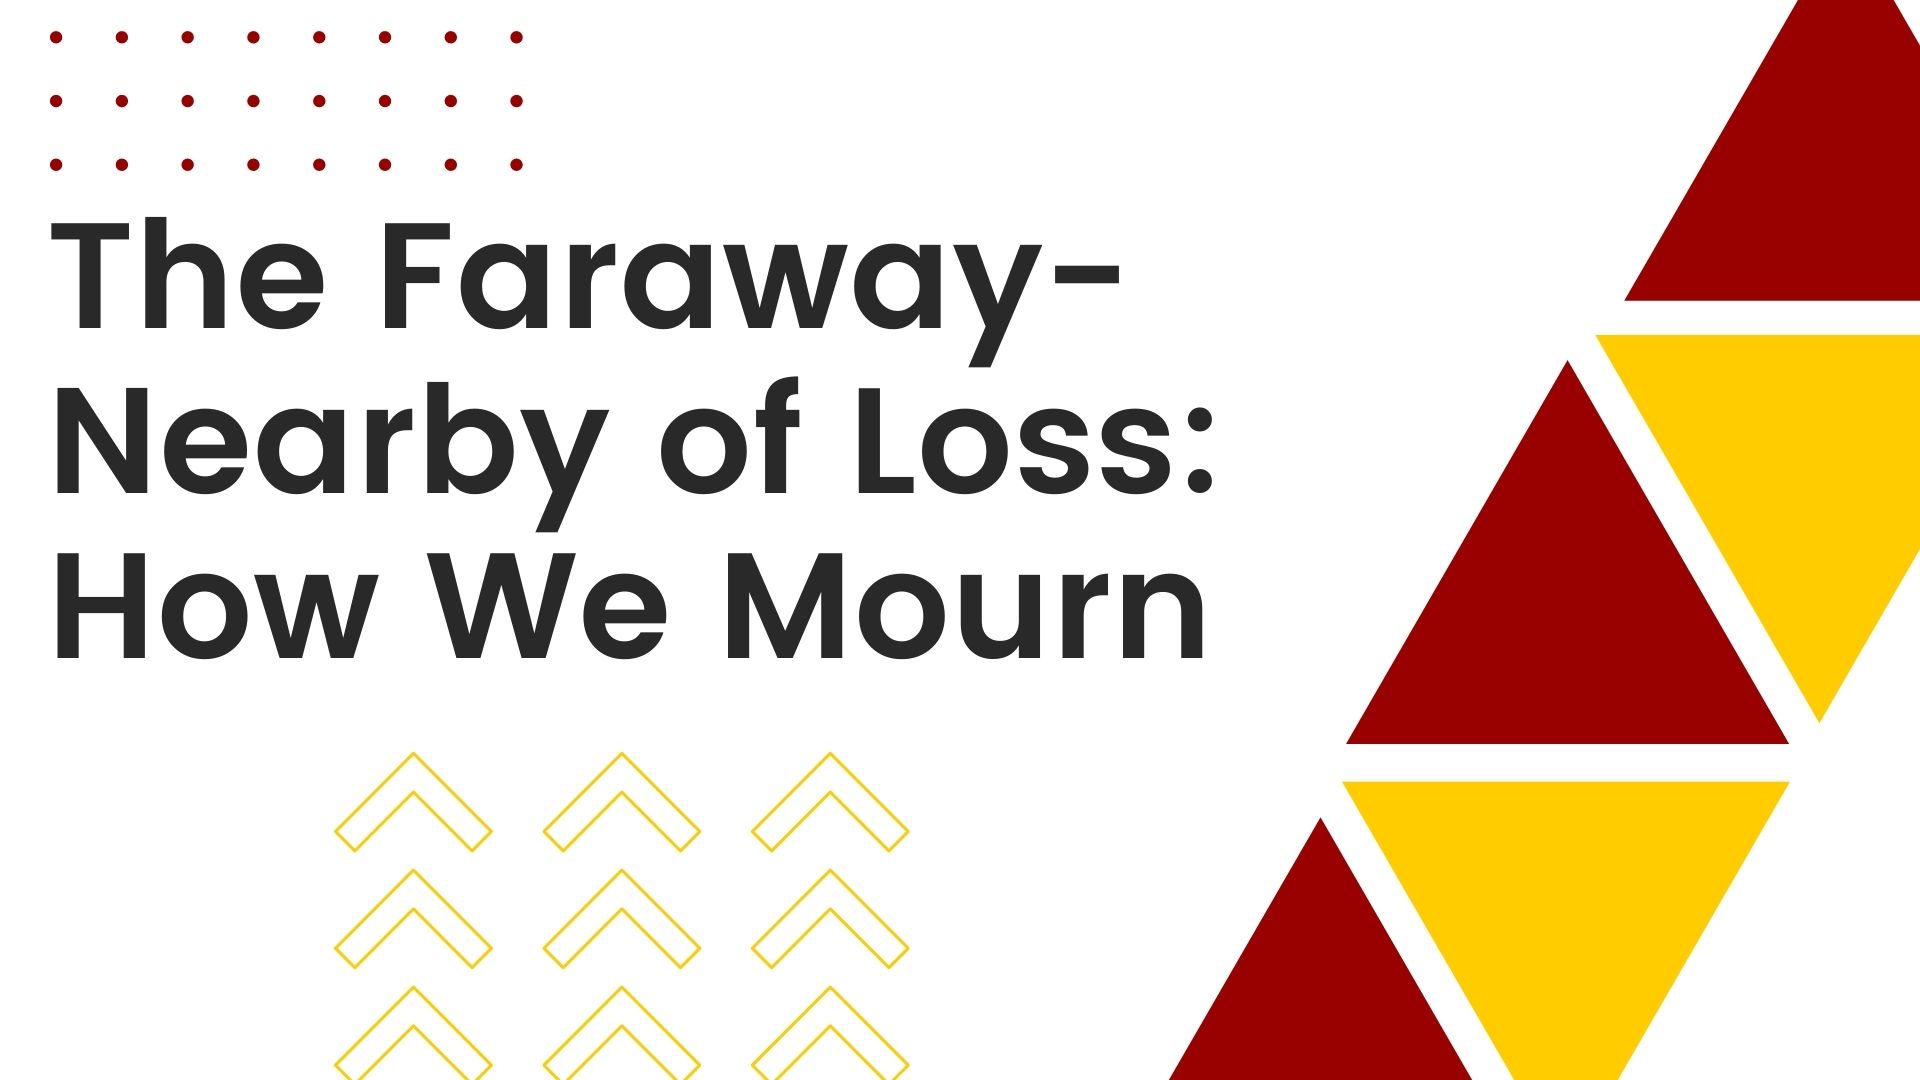 The Faraway-Nearby of Loss: How We Mourn